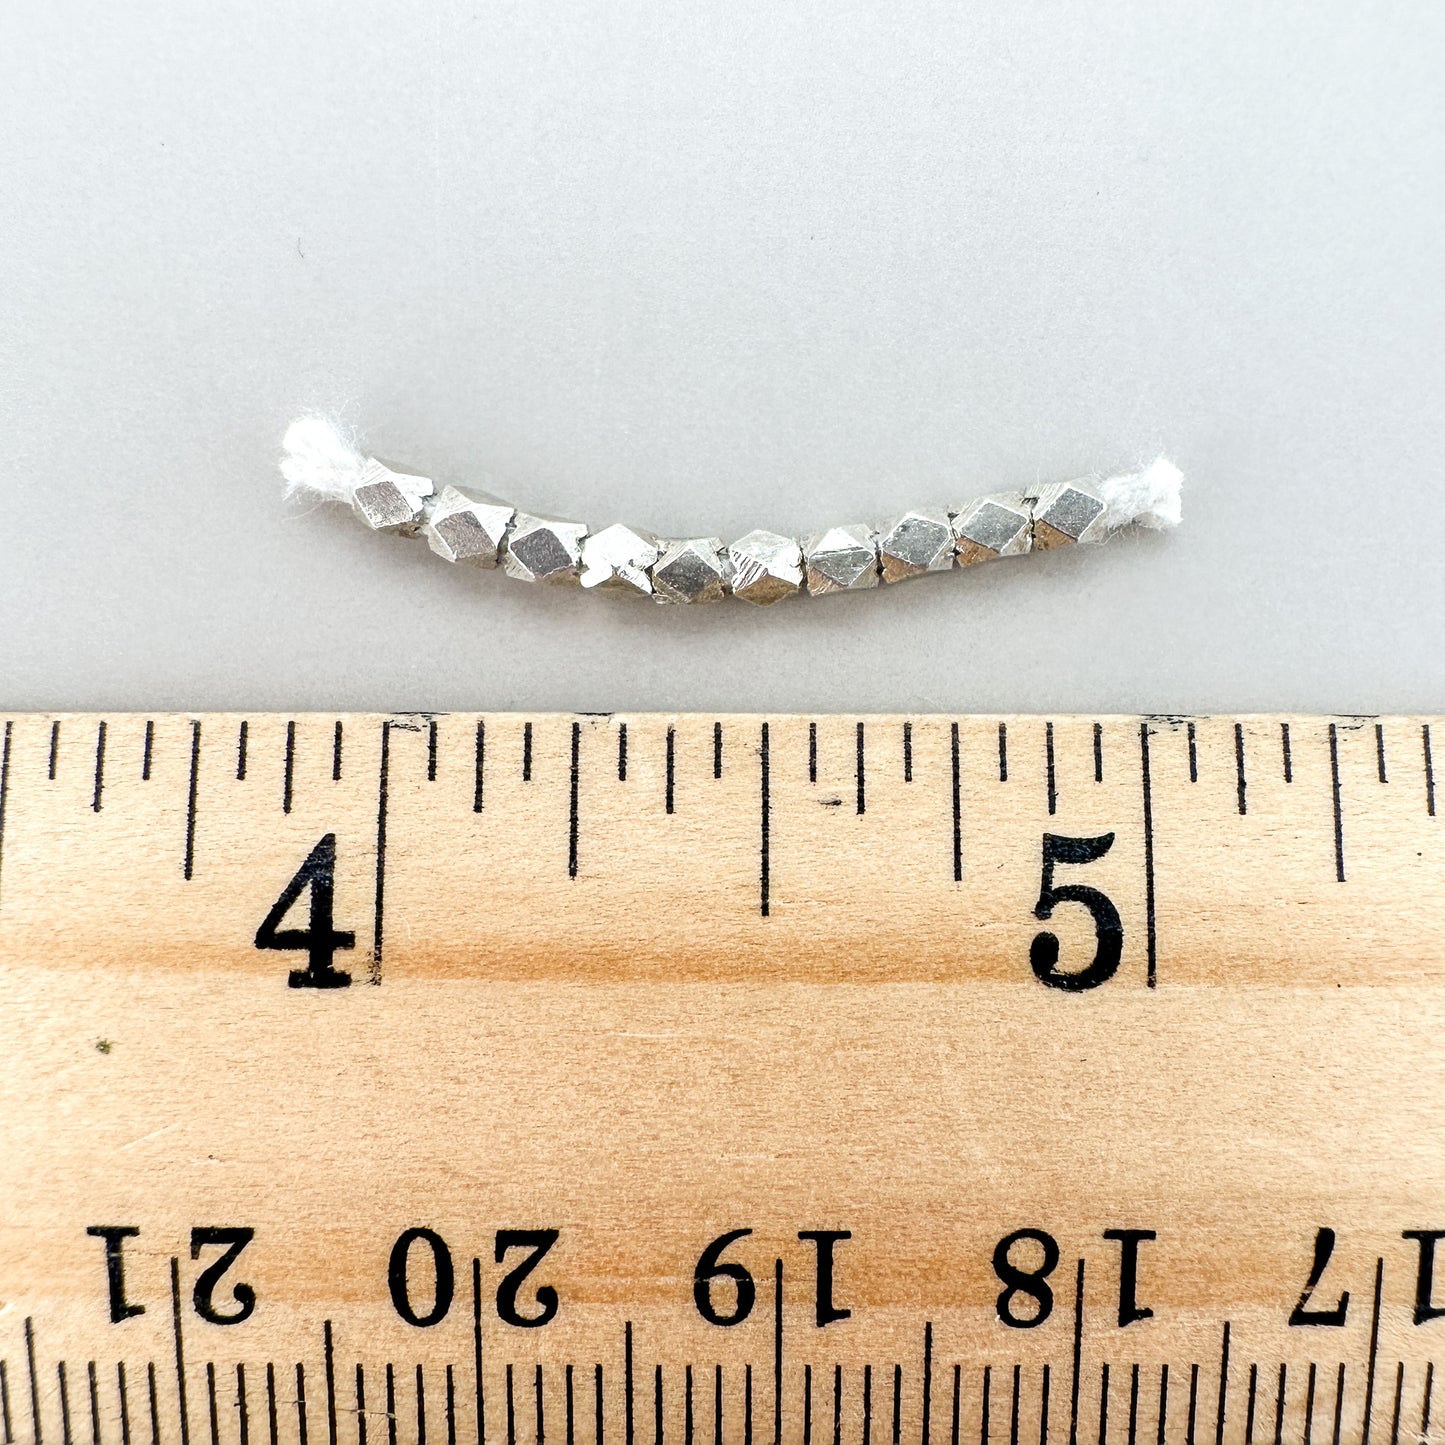 3mm Faceted Bead (Thai Silver) - 1 INCH (M466)